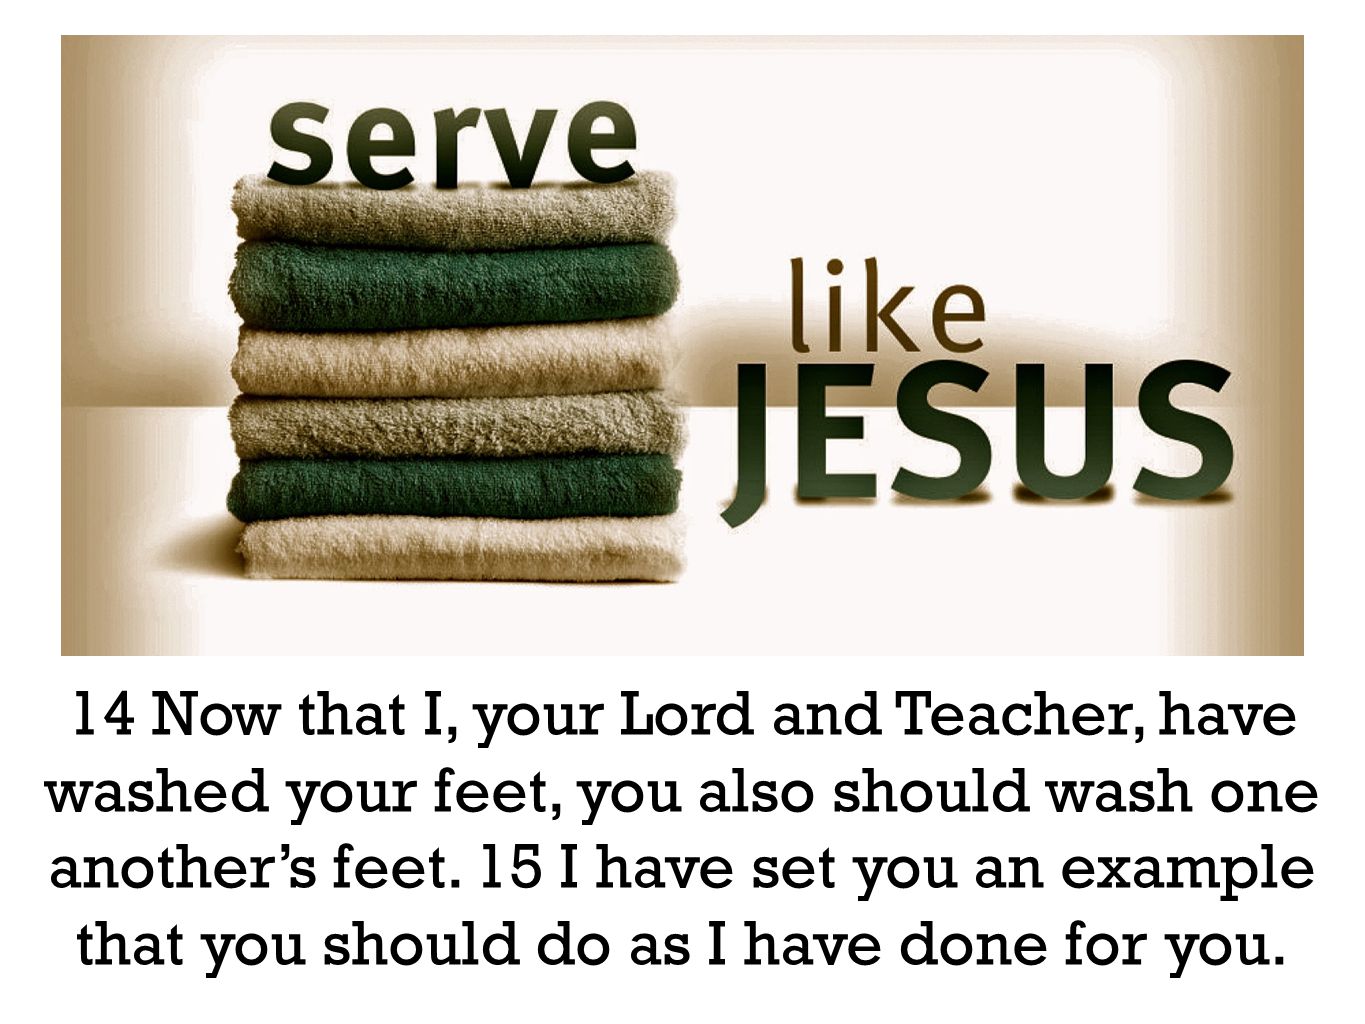 14 Now that I, your Lord and Teacher, have washed your feet, you also should wash one another’s feet.